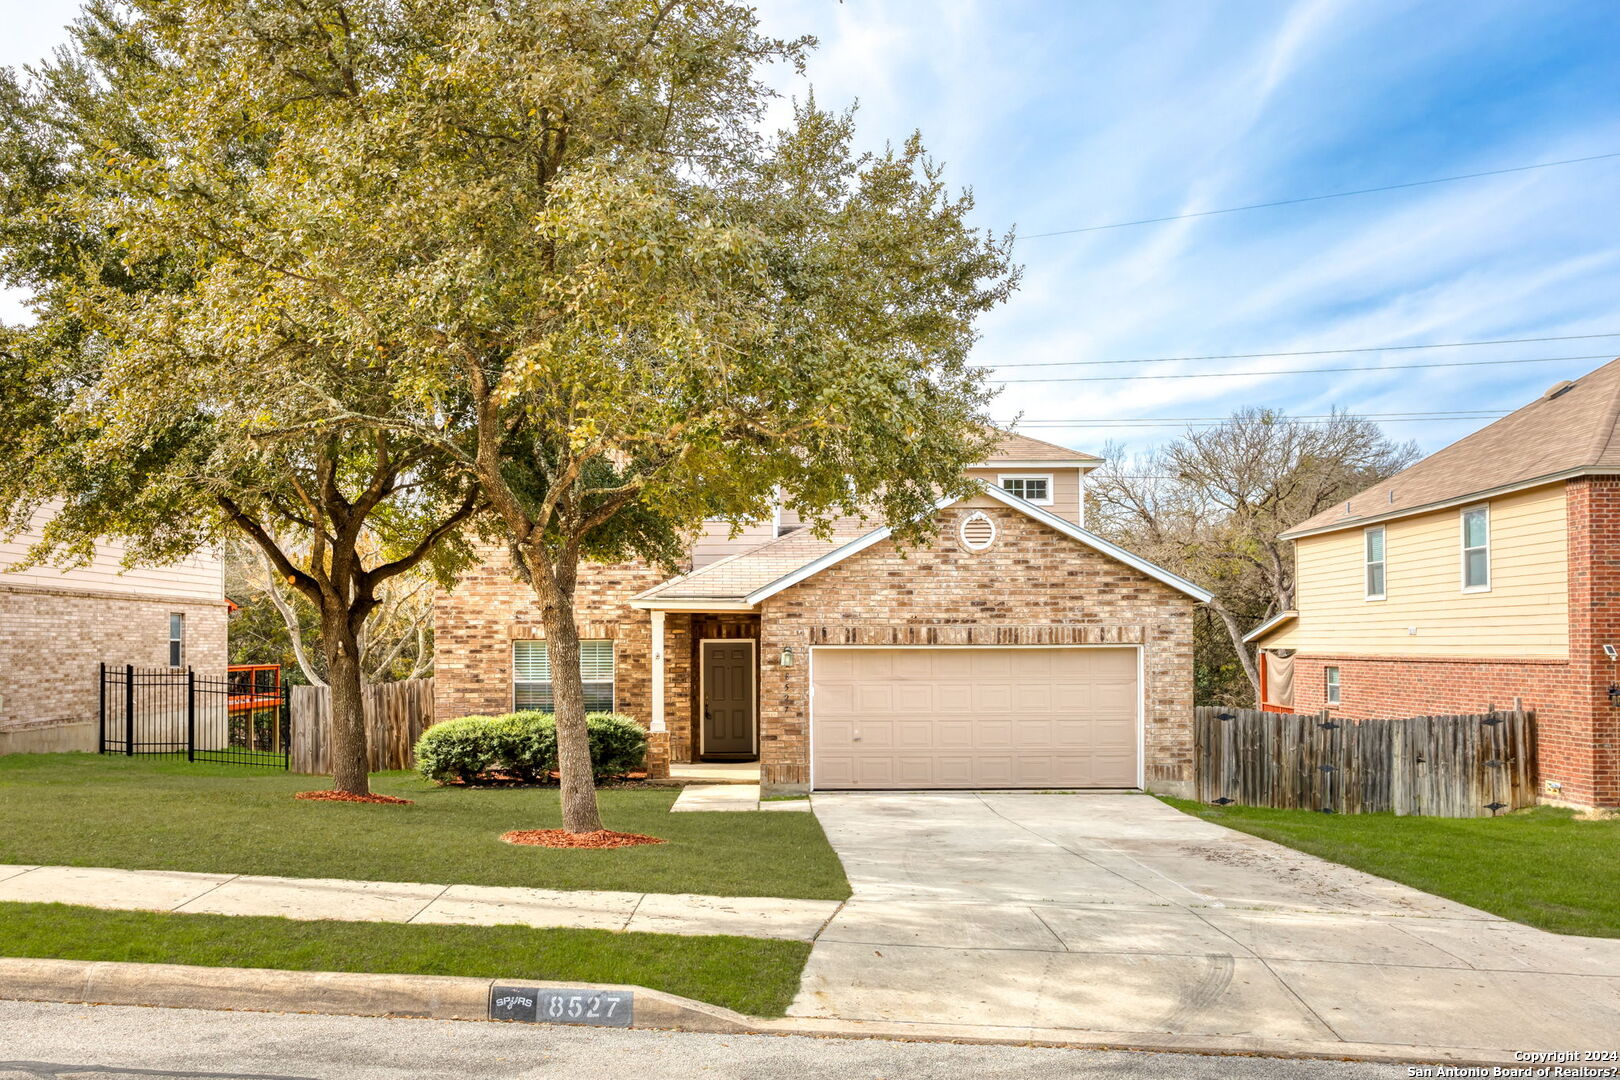 Photo of 8527 Collingwood in Universal City, TX